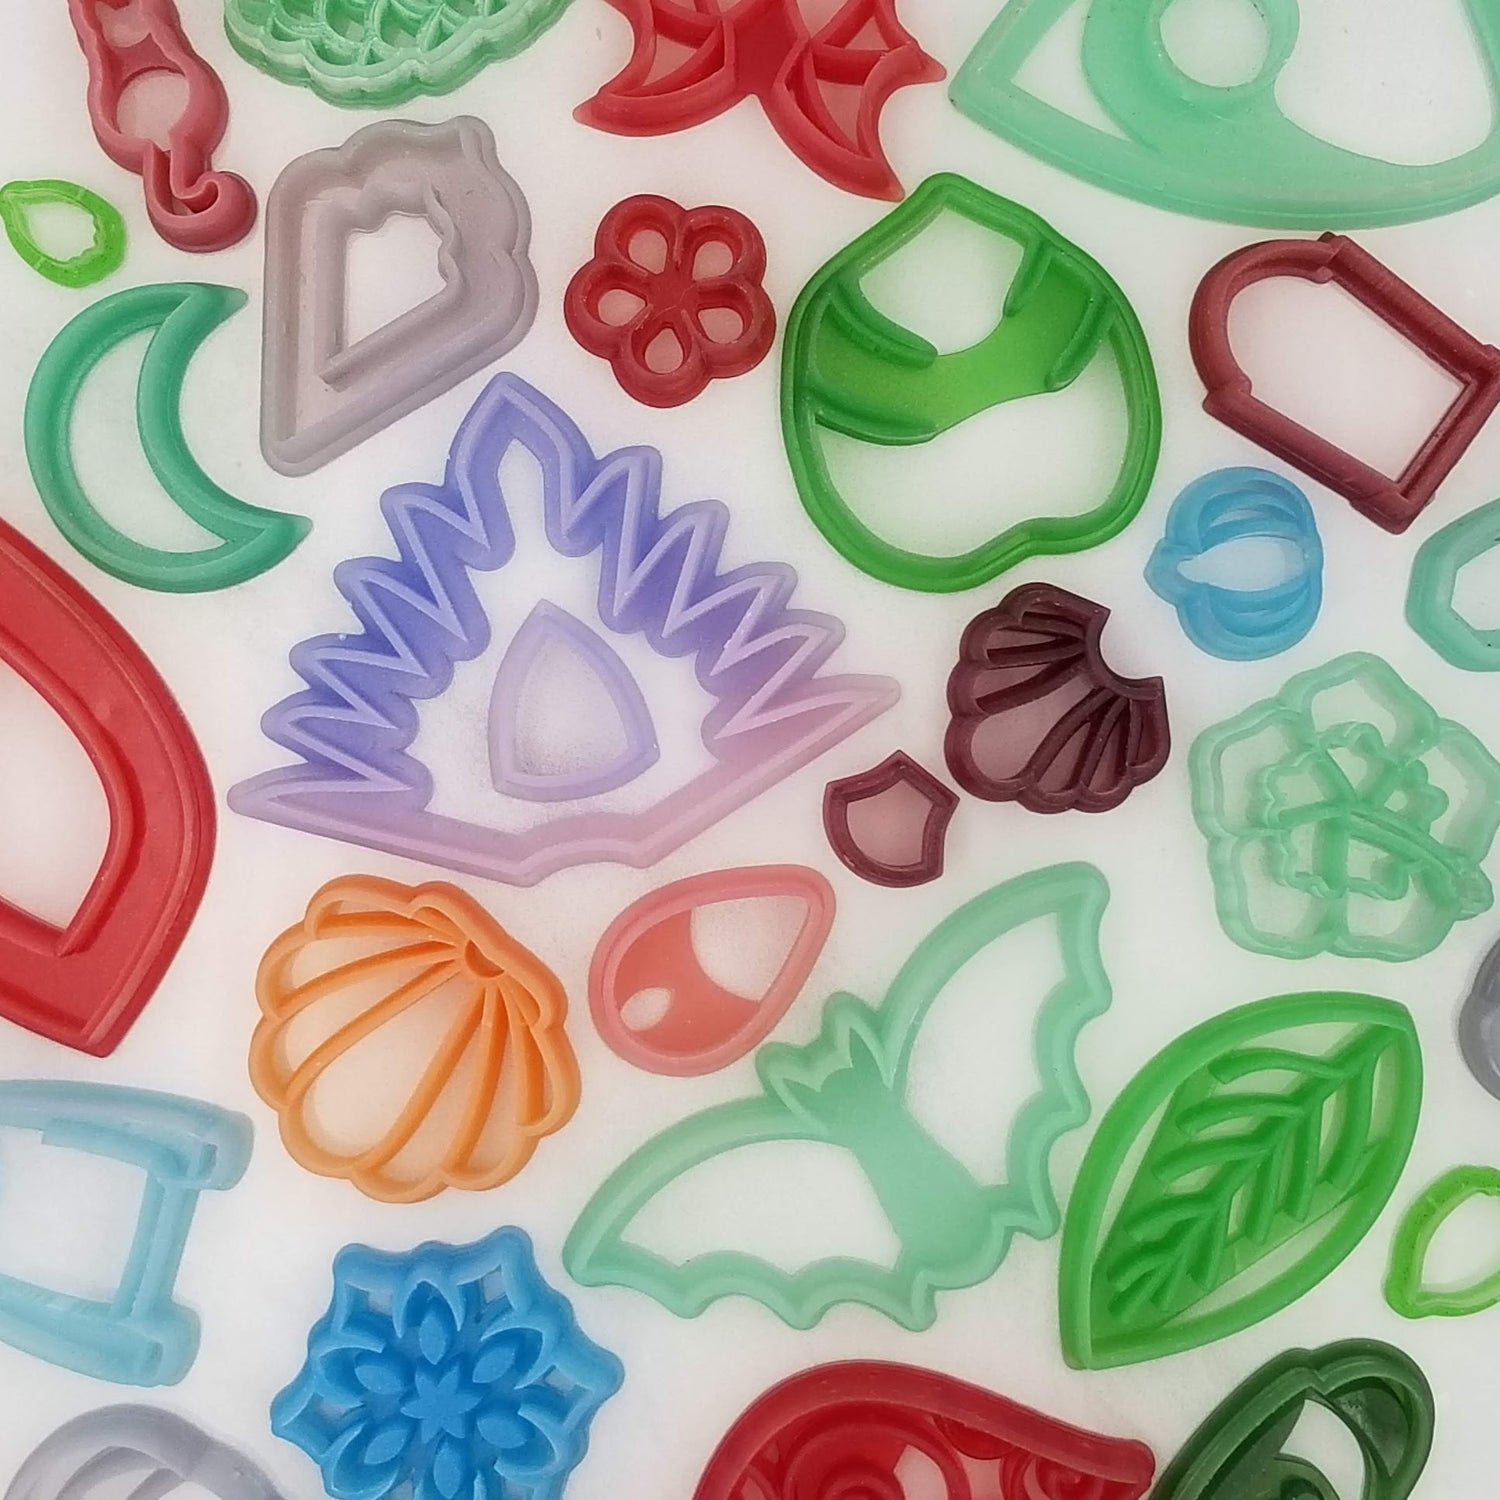 Kaly and Klay  Polymer Clay Supplies UK - Clay Cutters, Silkscreens